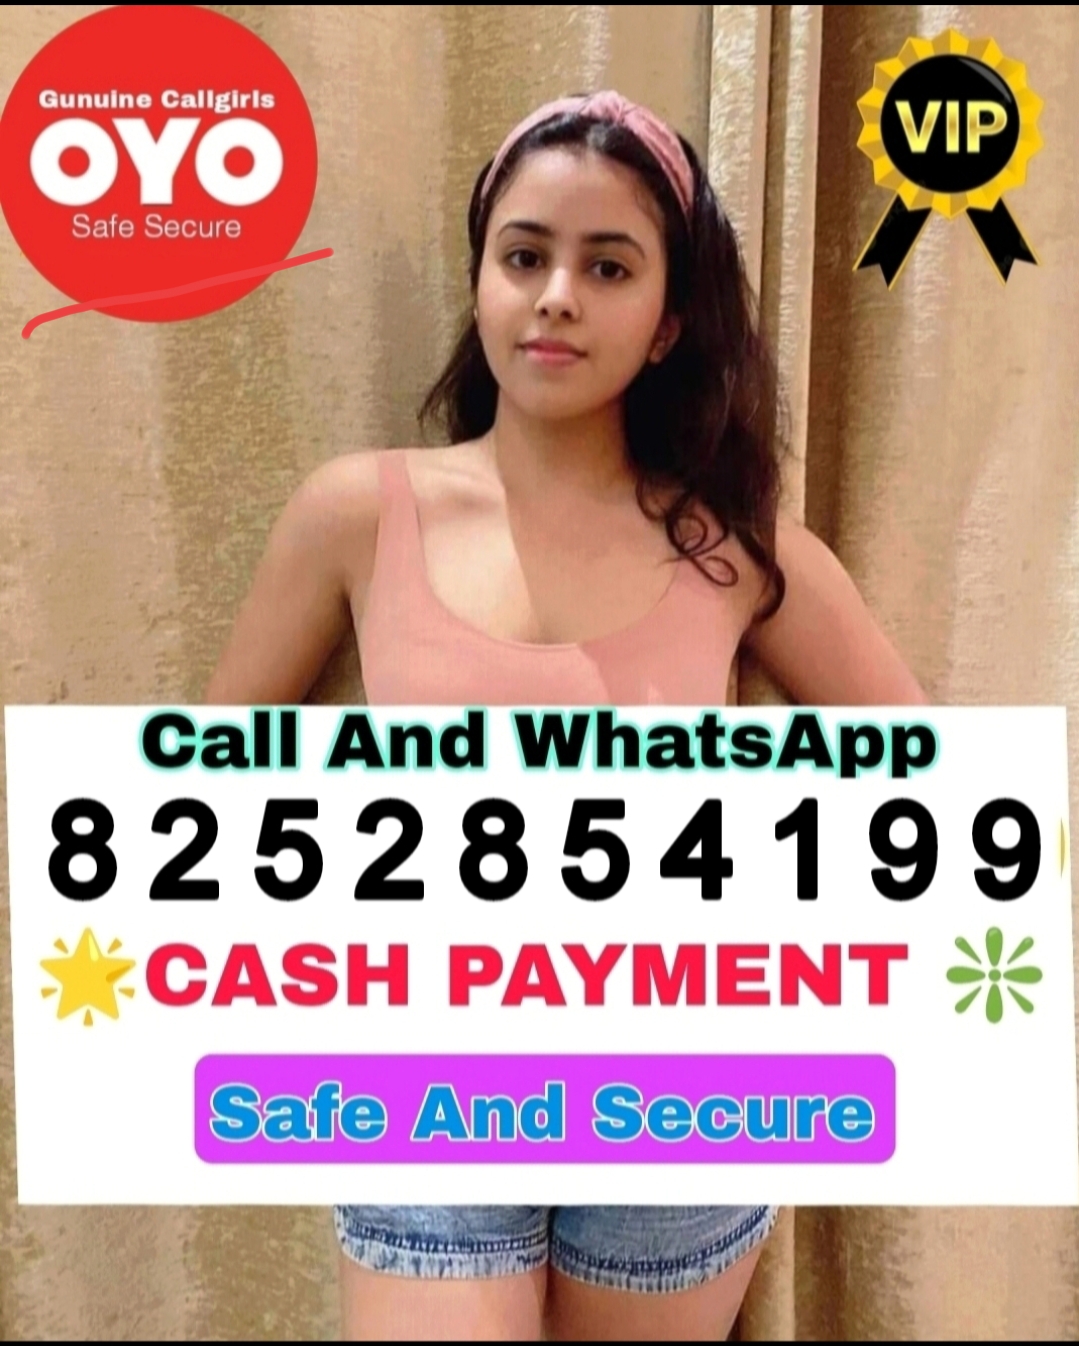 TODAY LOW PRICE  GENUINE CALL GIRL SAFE AND SECURE AVAILABLfibfyj